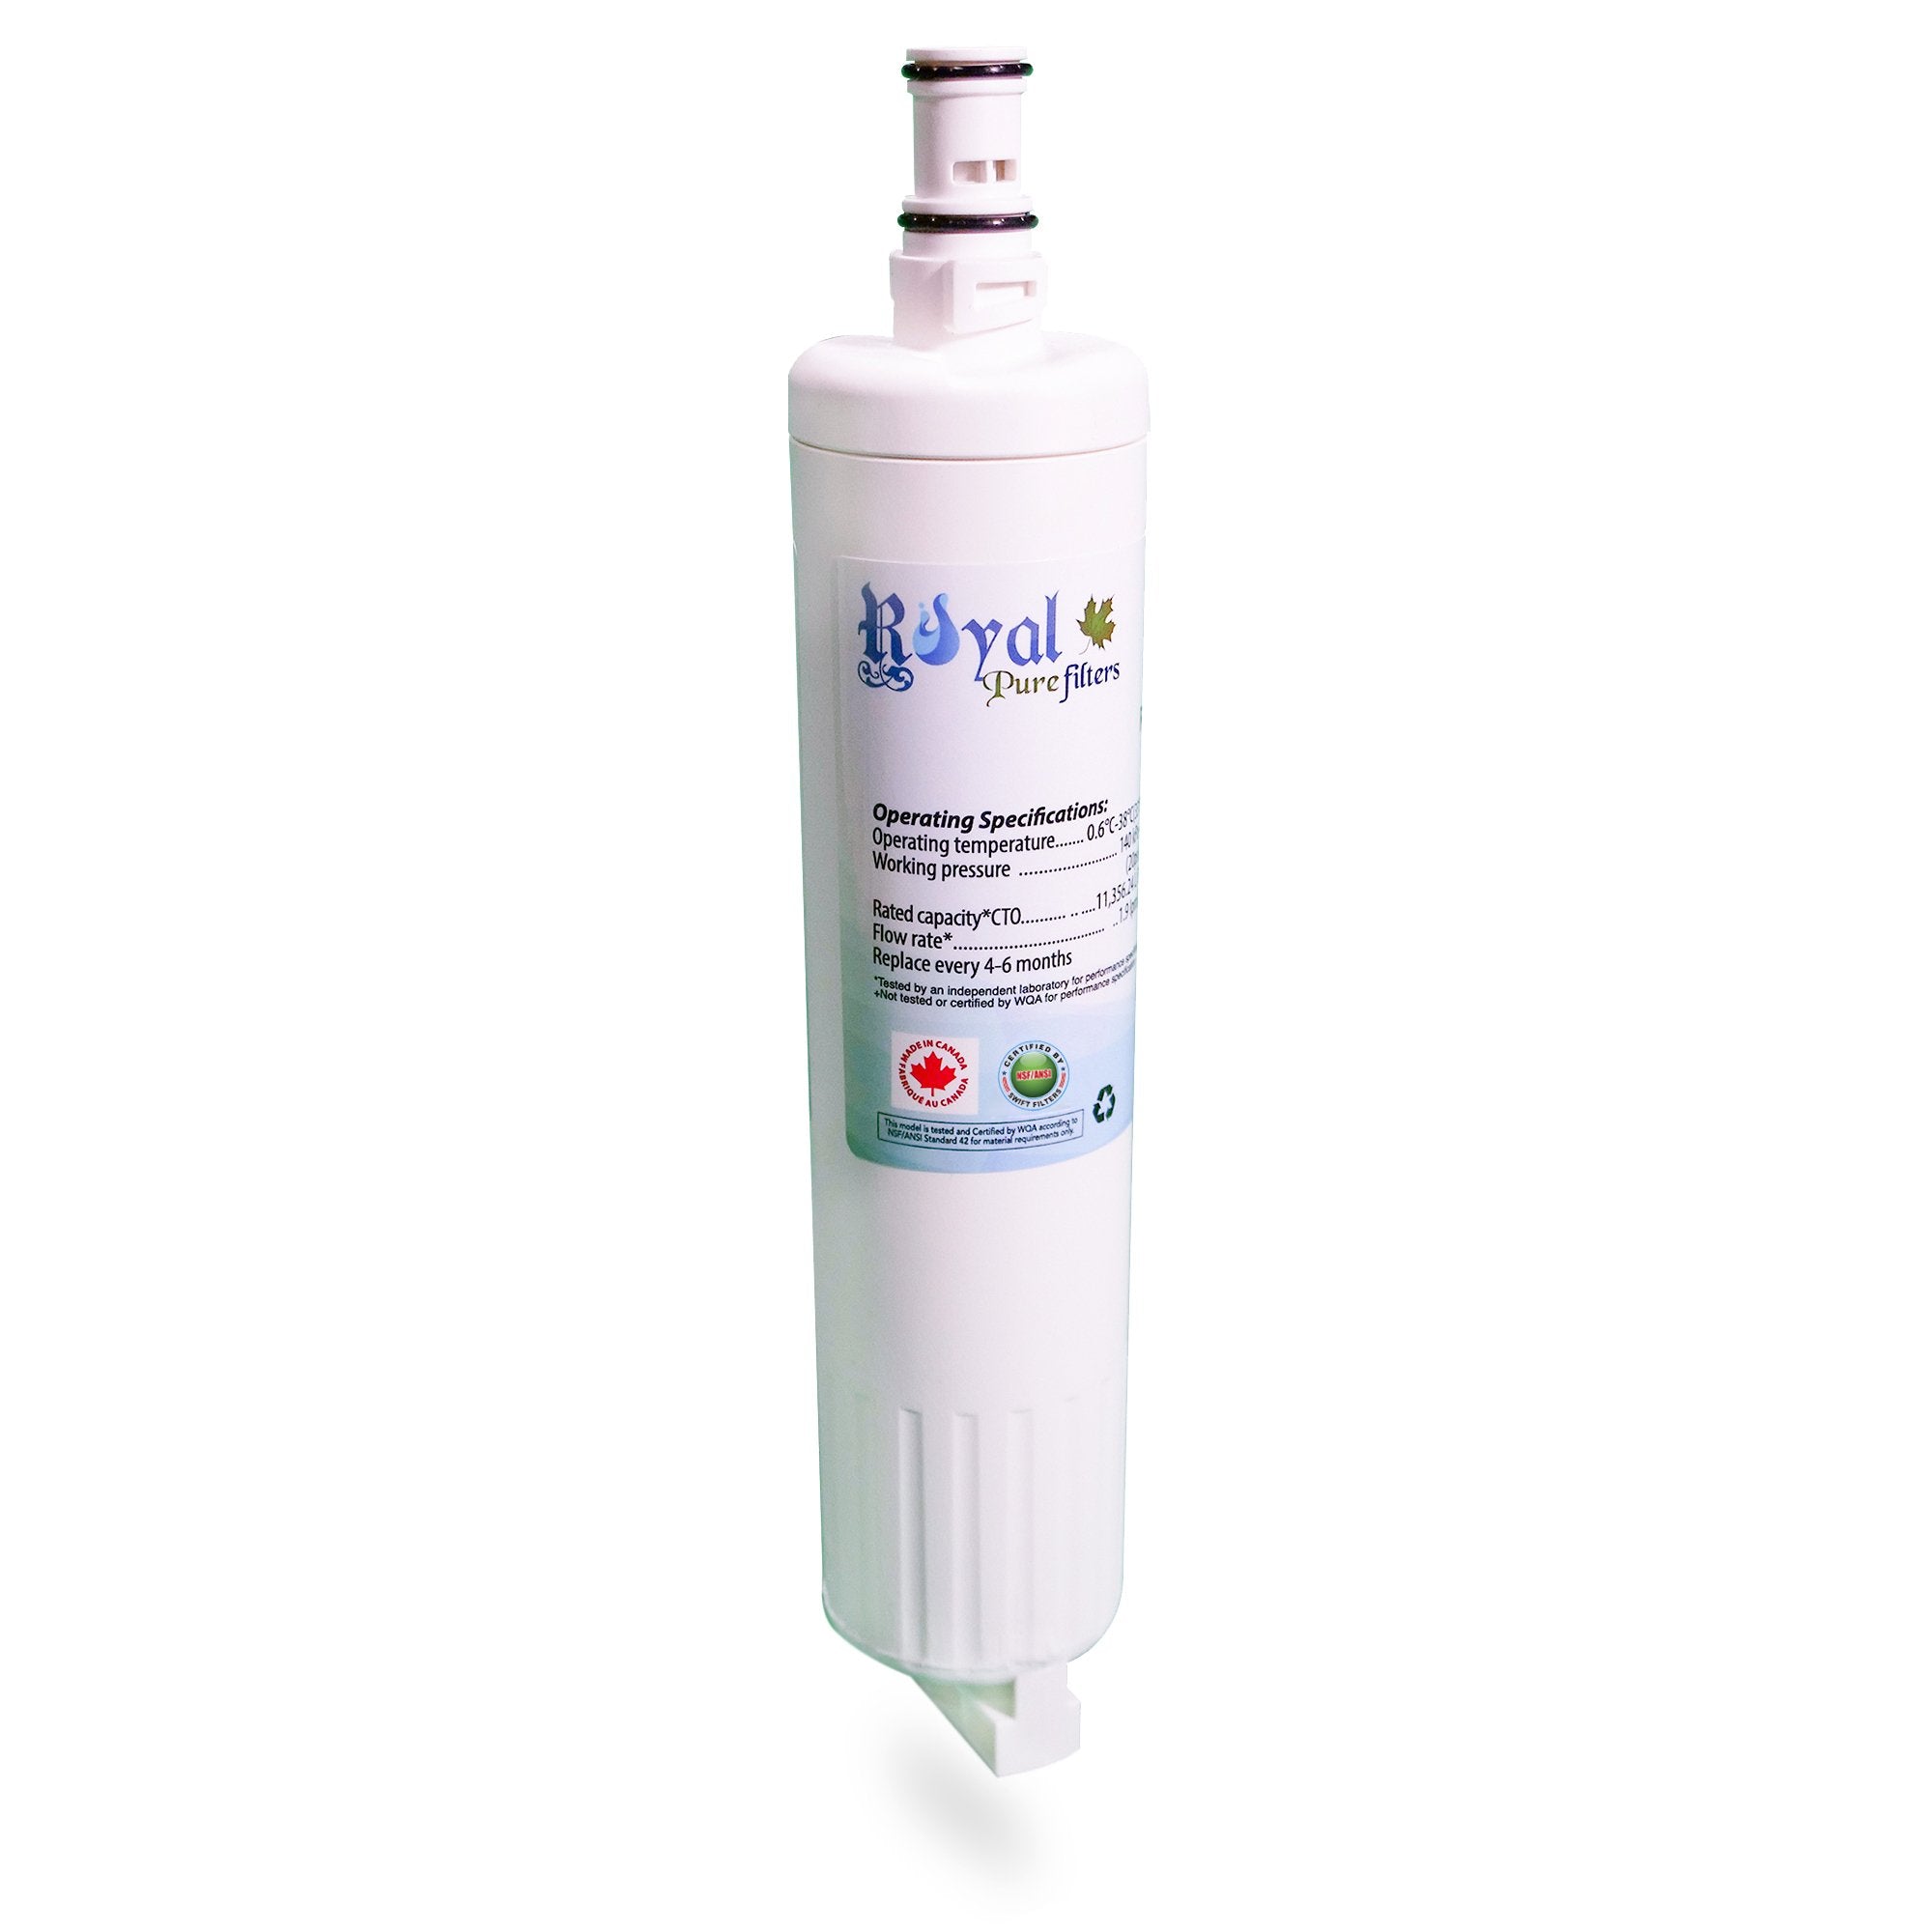 Whirlpool 4396508 Compatible CTO Refrigerator Water Filter